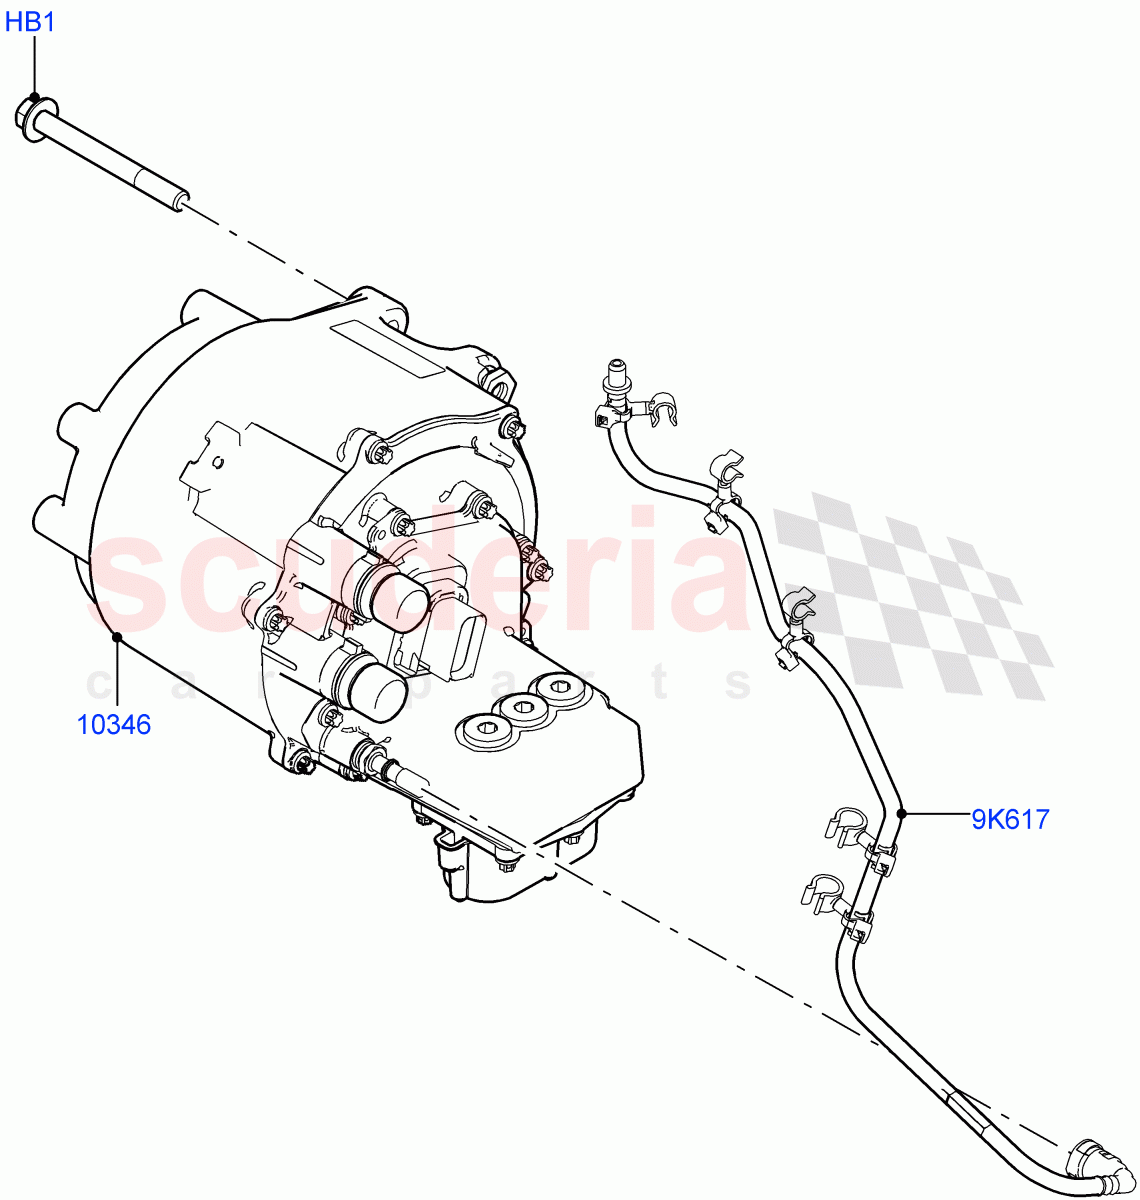 Alternator And Mountings(Changsu (China),Electric Engine Battery-PHEV)((V)FROMKG446857) of Land Rover Land Rover Discovery Sport (2015+) [2.0 Turbo Petrol AJ200P]